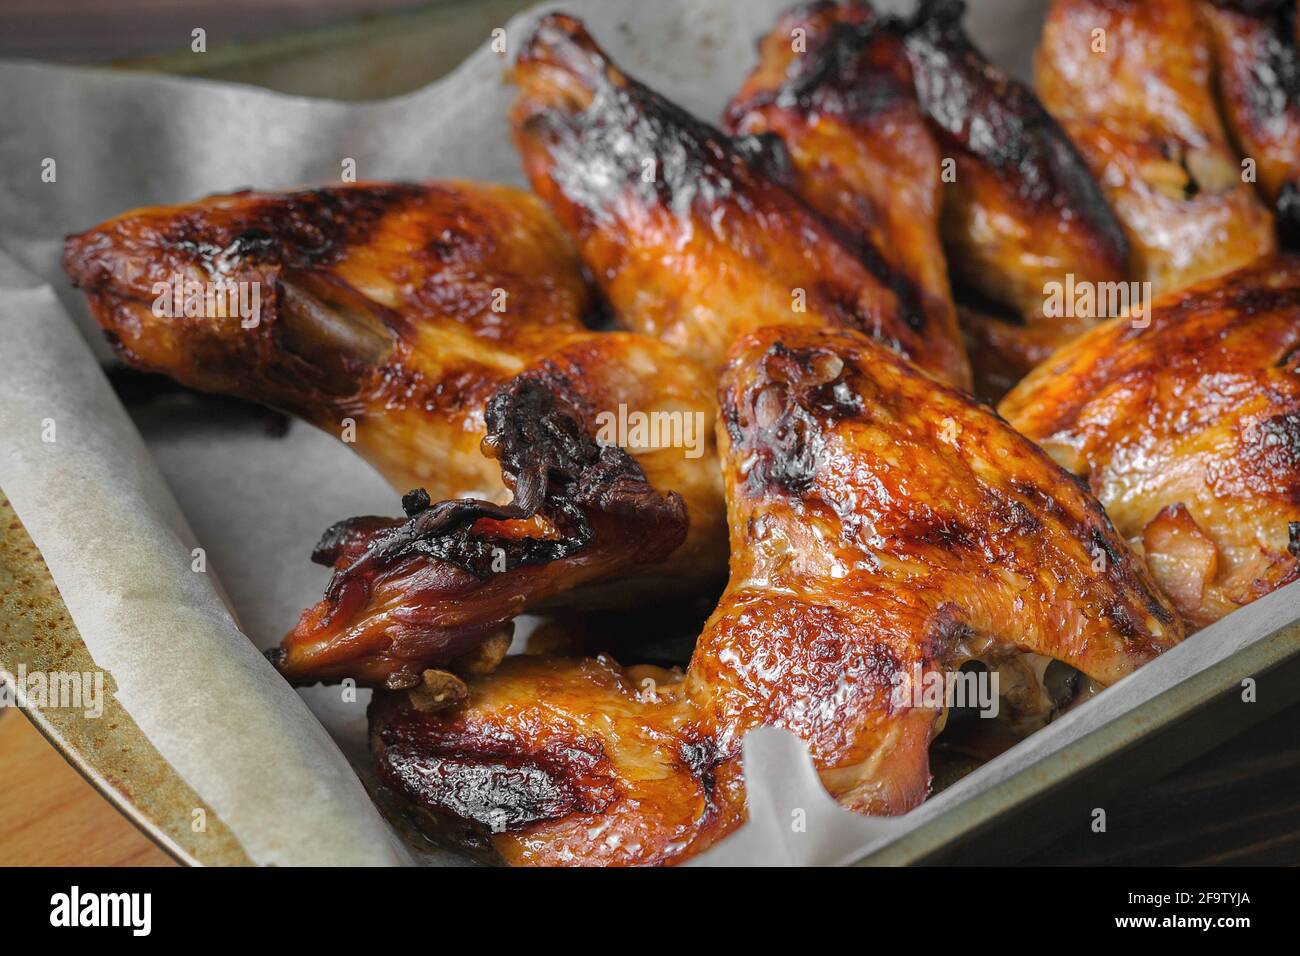 Baked chicken wings on a baking sheet, with a golden crispy crust. Stock Photo